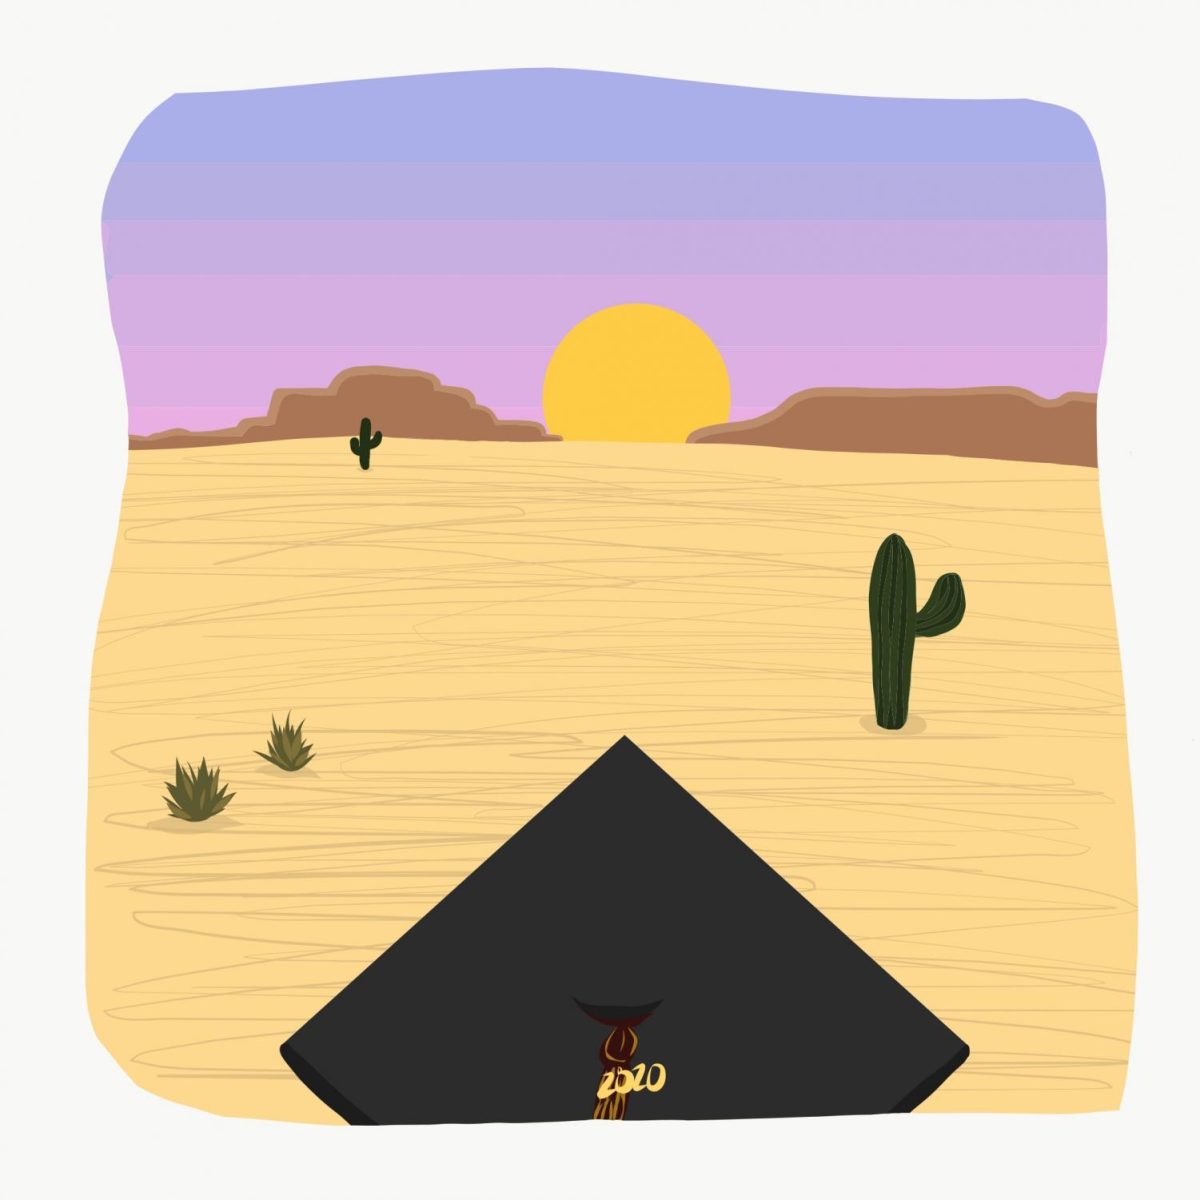 An illustration of a person wearing a “2020” graduation cap looking out over a desert